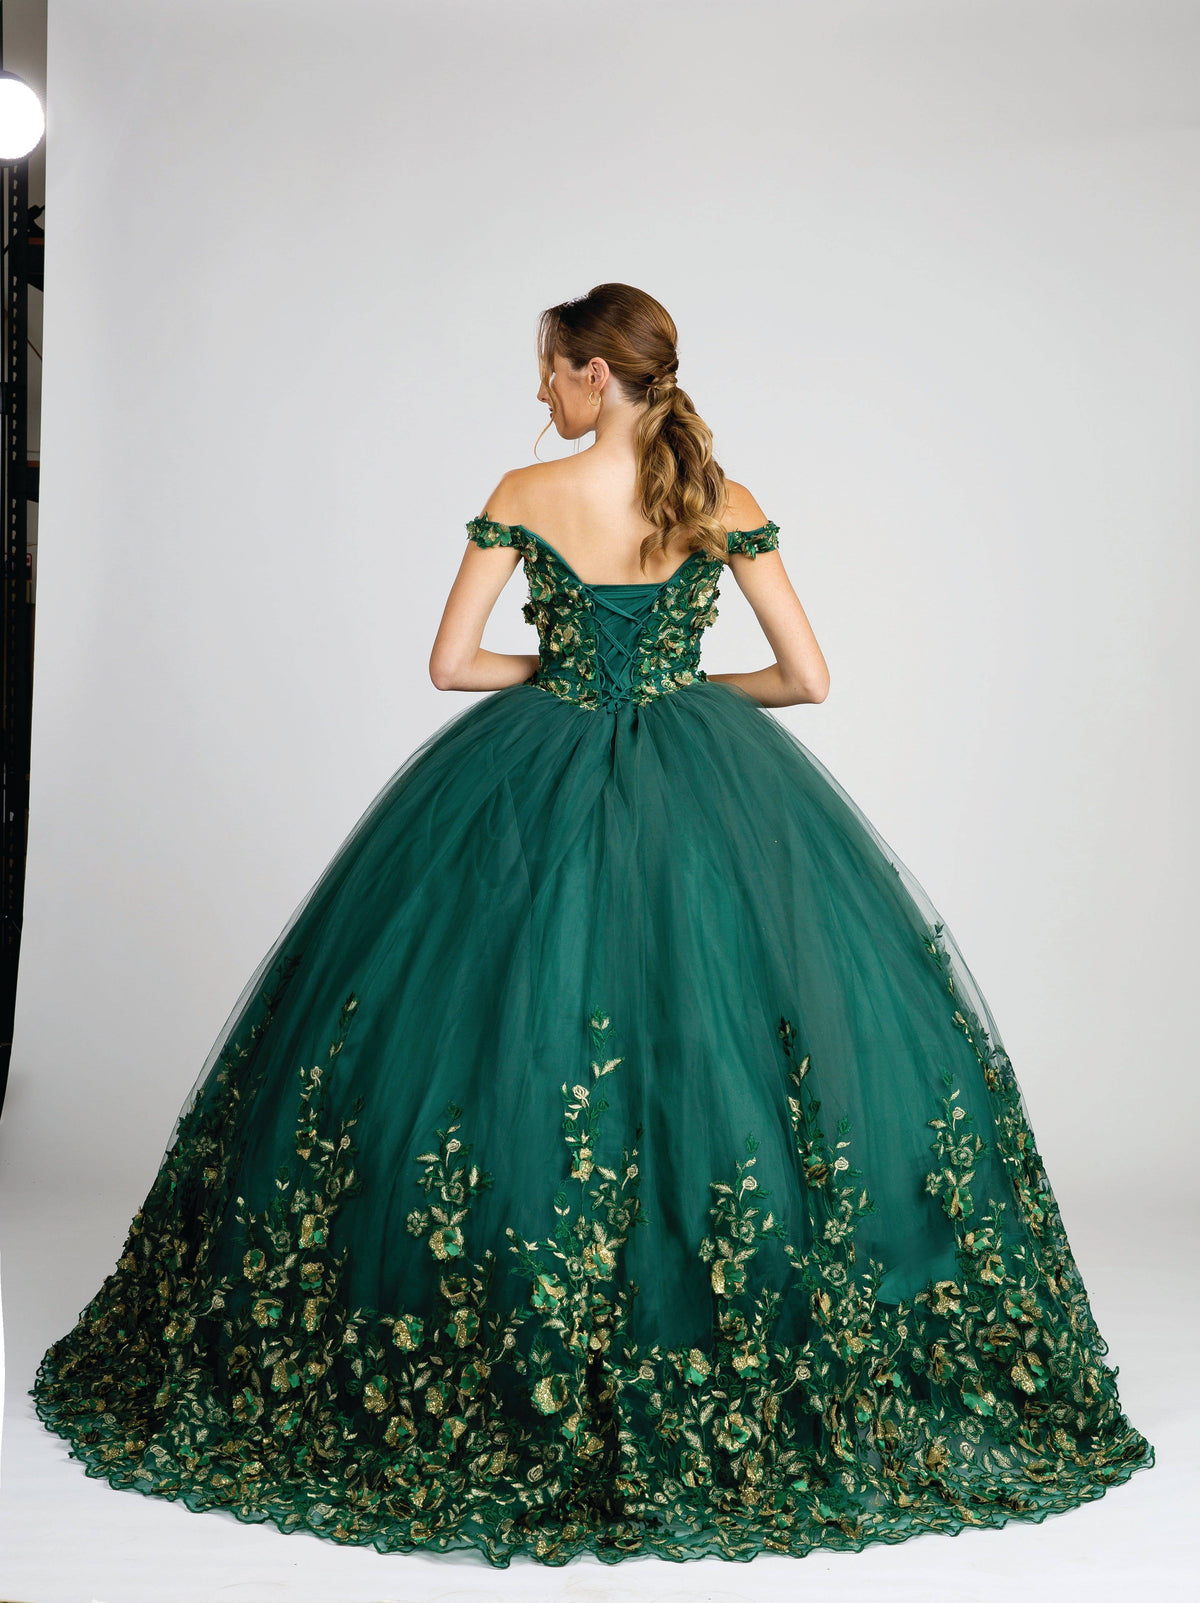 Fiesta 10273 Floral Off Shoulder Ball Gown - NORMA REED